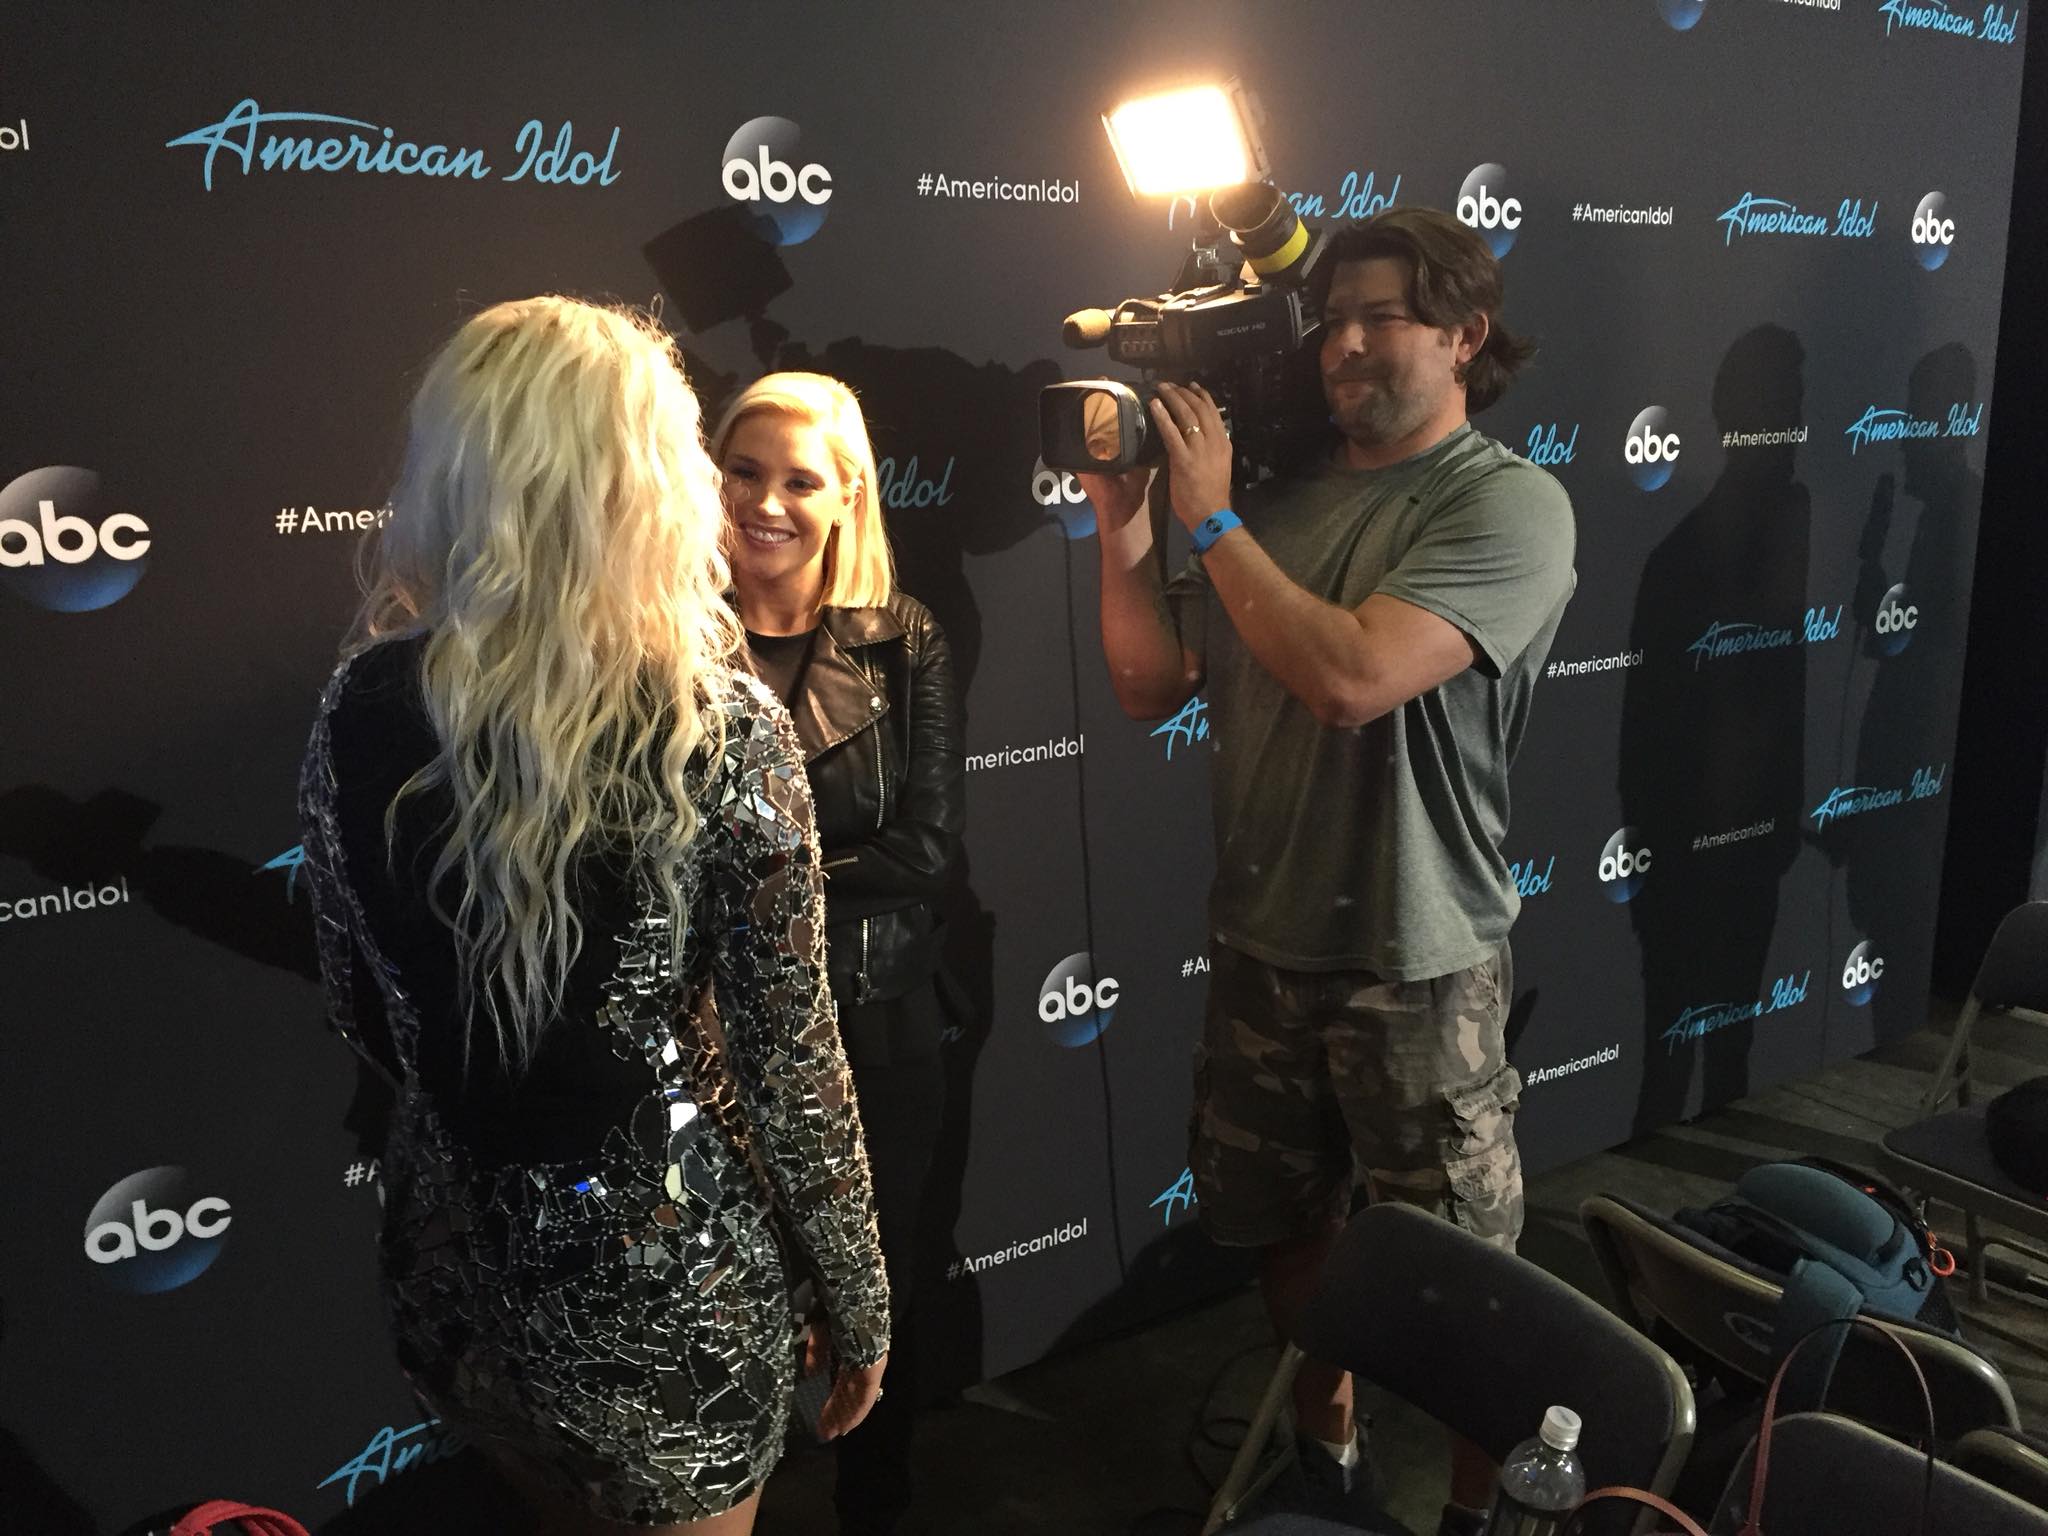 Gabby Barrett backstage interview at American Idol on May 20, 2018.
Photo credit: Jackie Cain WTAE
